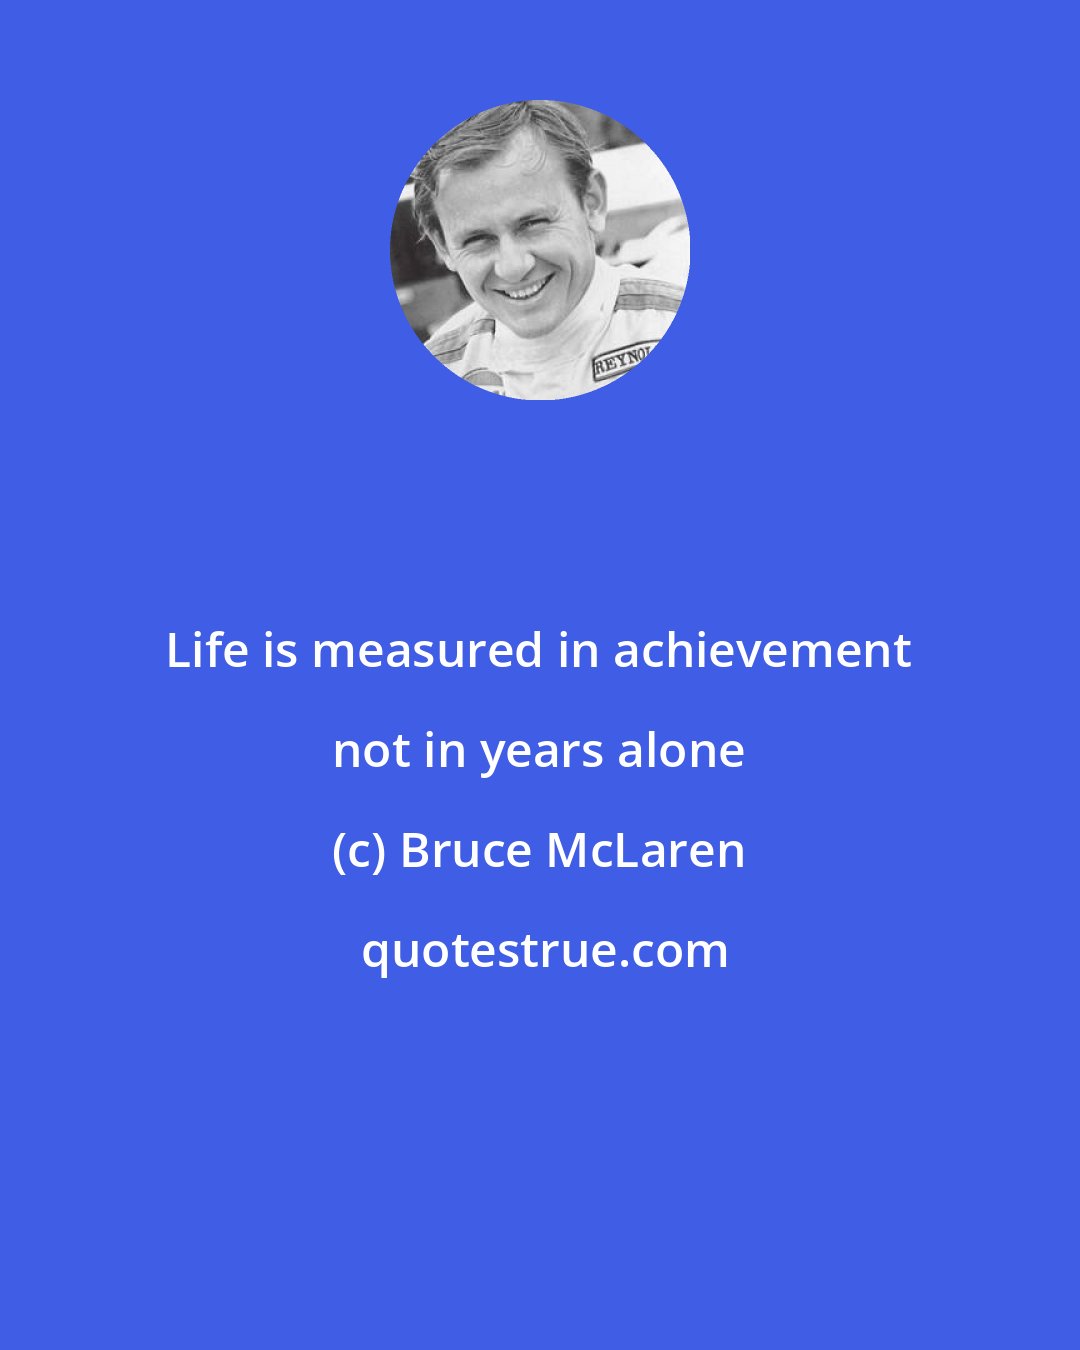 Bruce McLaren: Life is measured in achievement not in years alone